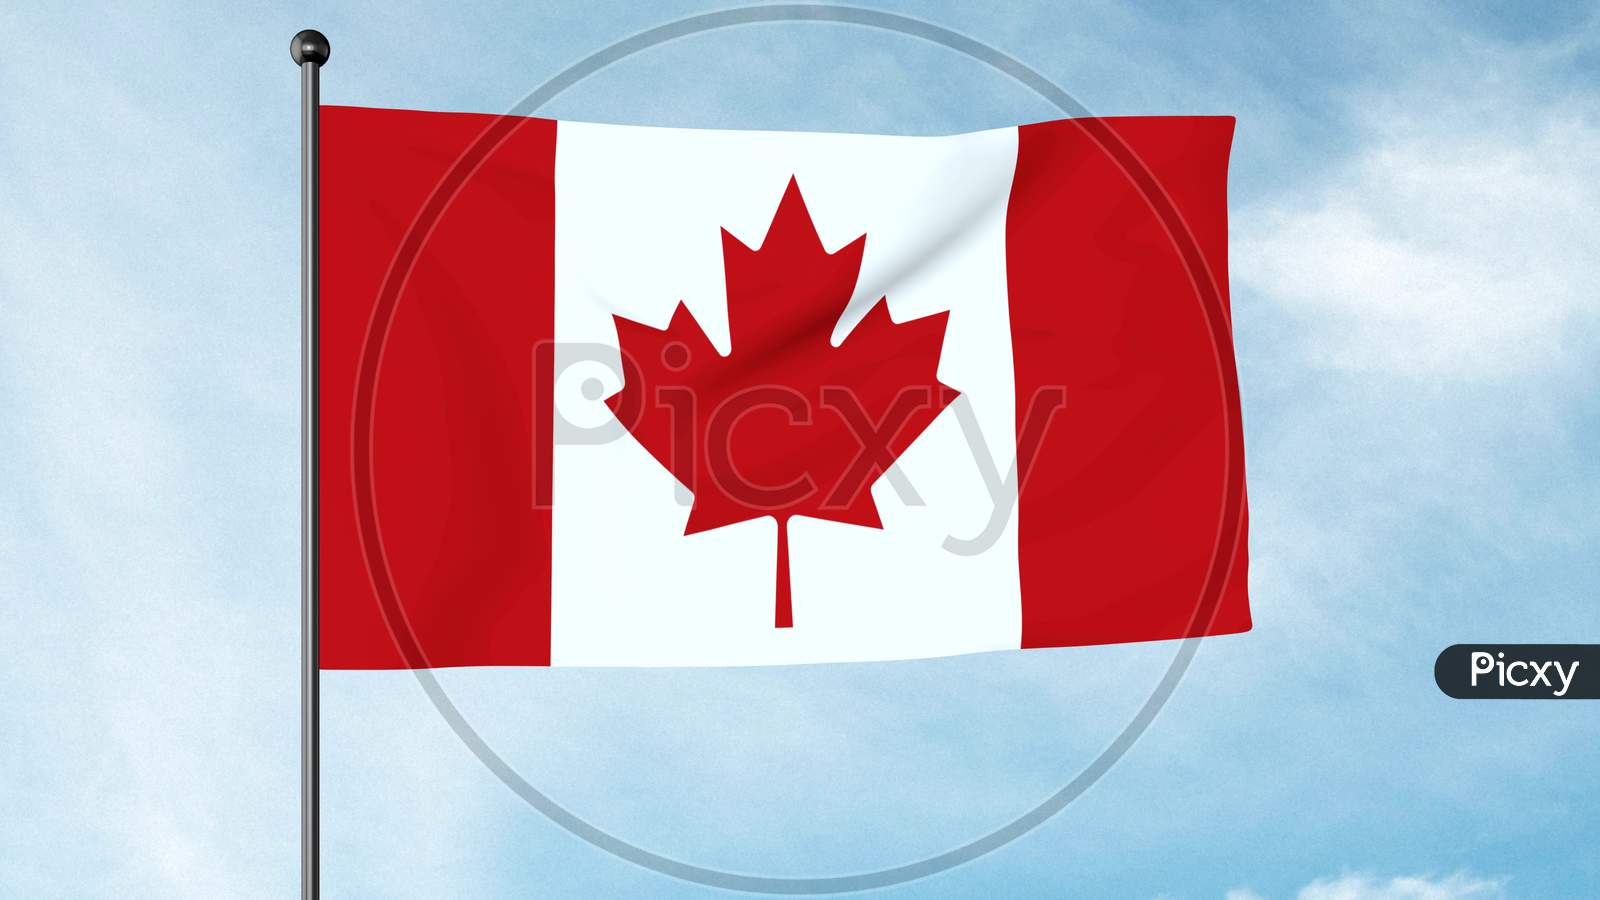 3D Illustration The National Flag Of Canada, The Canadian Flag, The Maple Leaf Or L'Unifolié, Consists Of A Red Field With A White Square At Its Centre In The Ratio Of 1:2:1, In The Middle Of Which Is Featured A Stylized